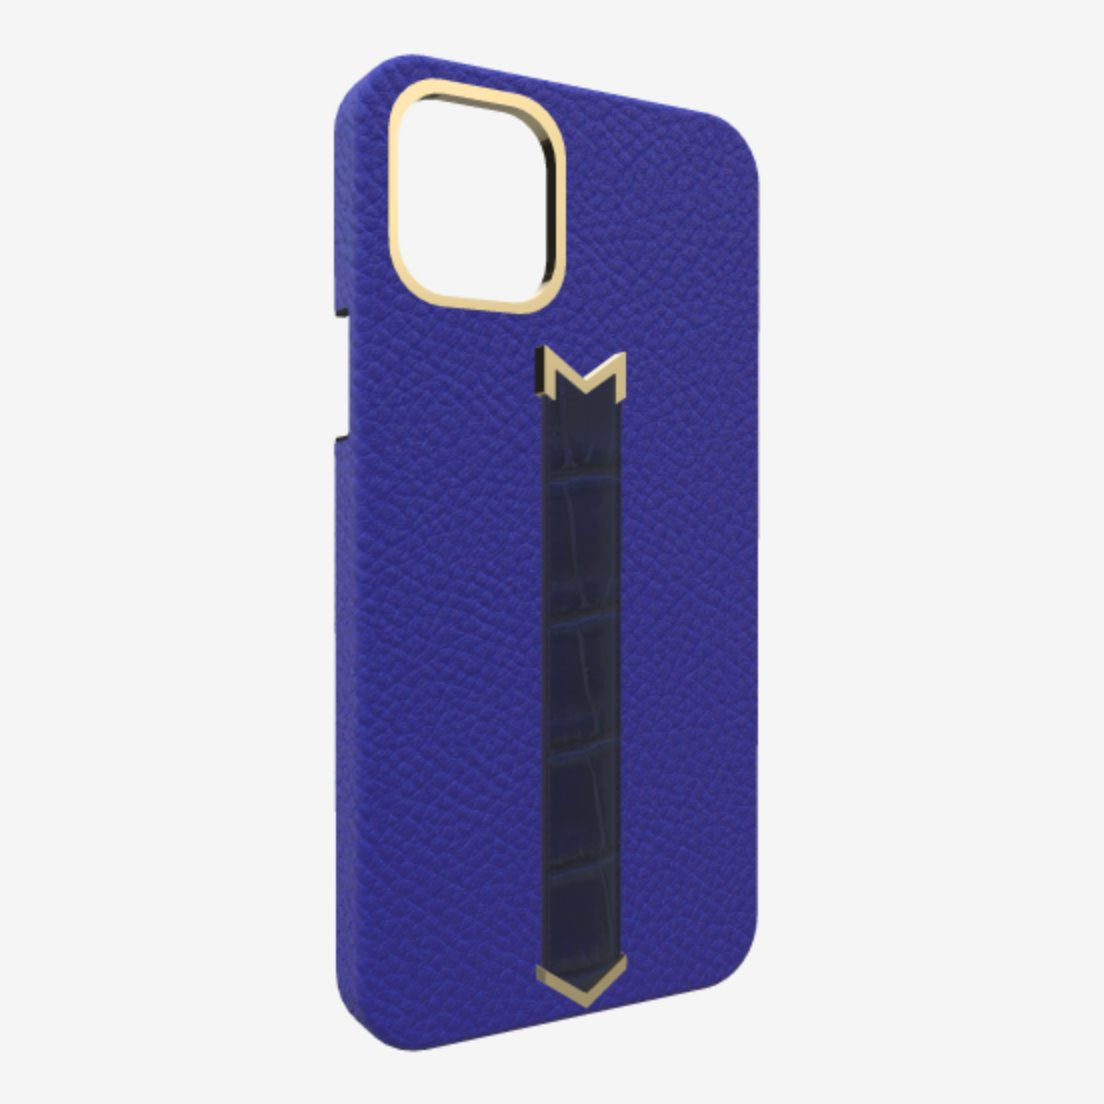 Gold Finger Strap Case for iPhone 13 Pro Max in Genuine Calfskin and Alligator Electric Blue Navy Blue 